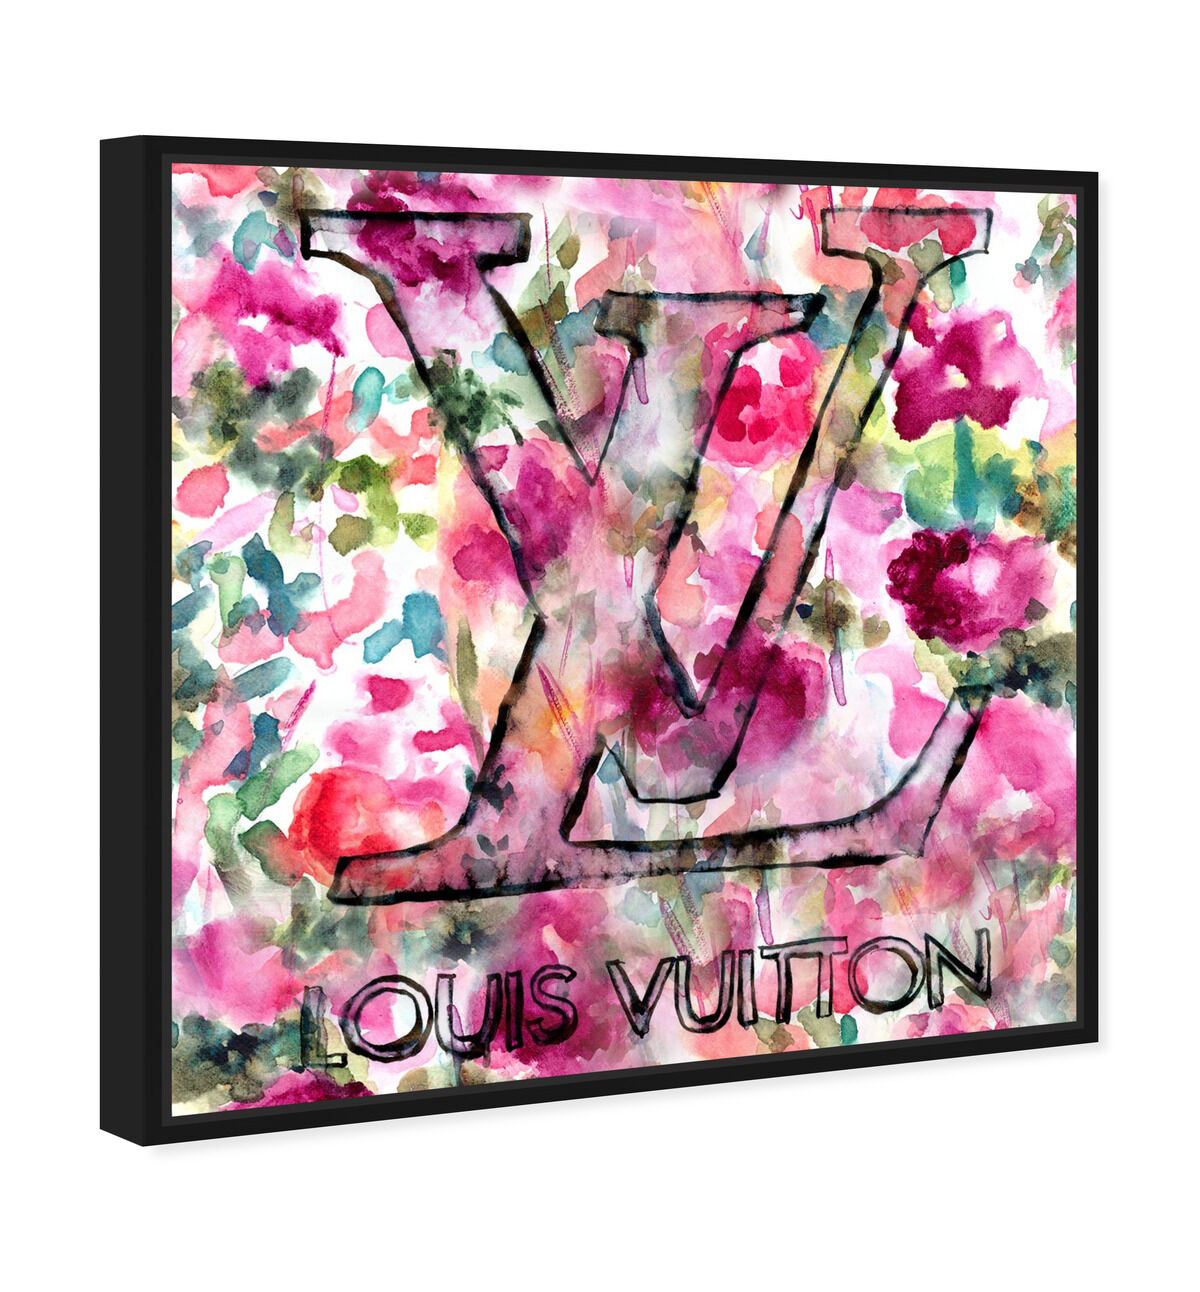 Louis Vuitton Pattern V6 Logo Wall Decal Home Decor Bedroom Room Vinyl   boop decals